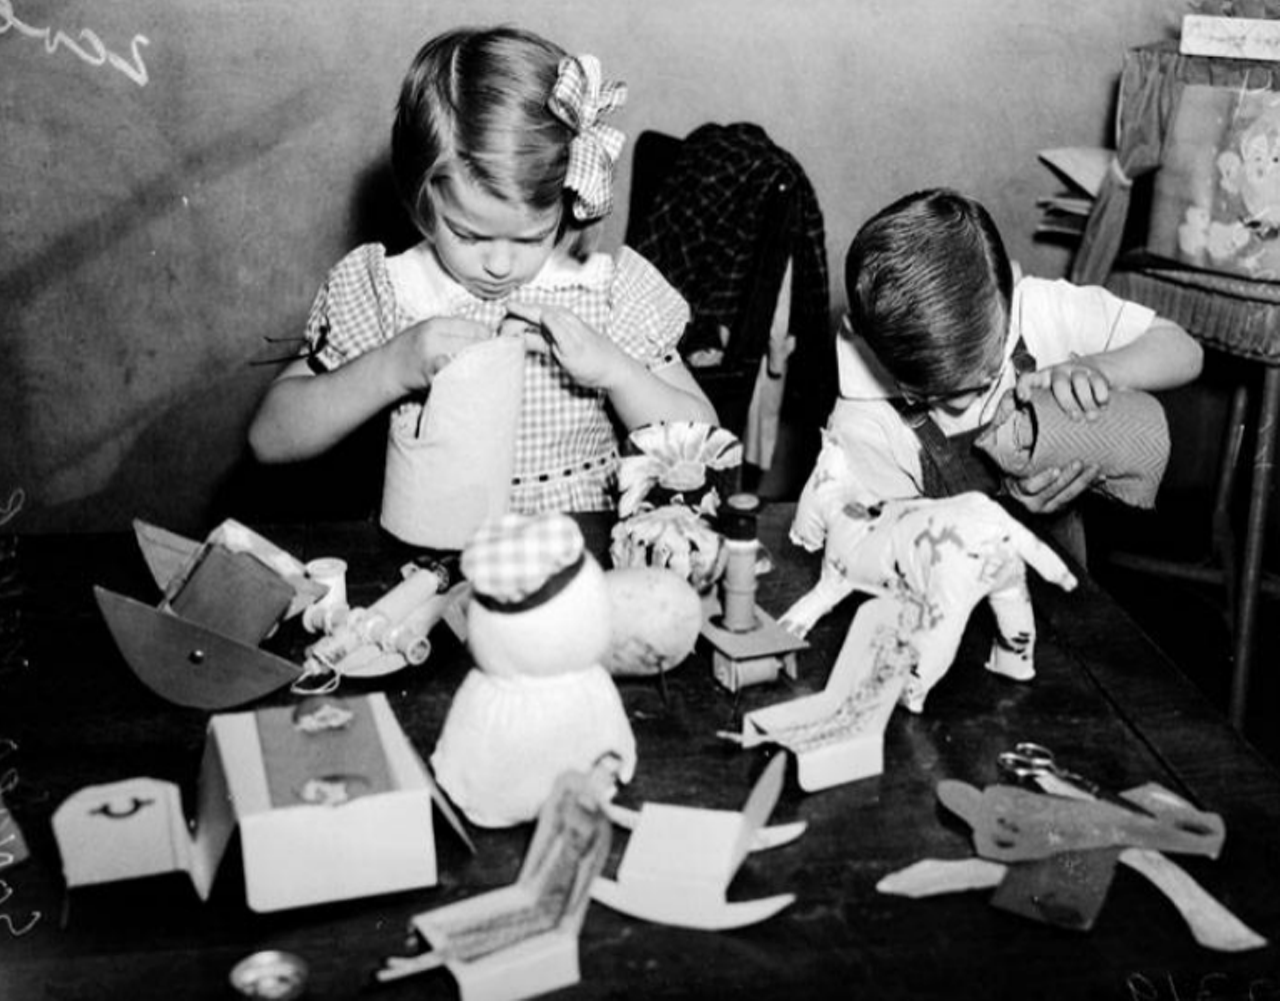 SA has been about giving back for a long time. In this 1939 photo, you can see little kids helping Santa make toys at the recreation center at Woodlawn Park. How adorable, right?!